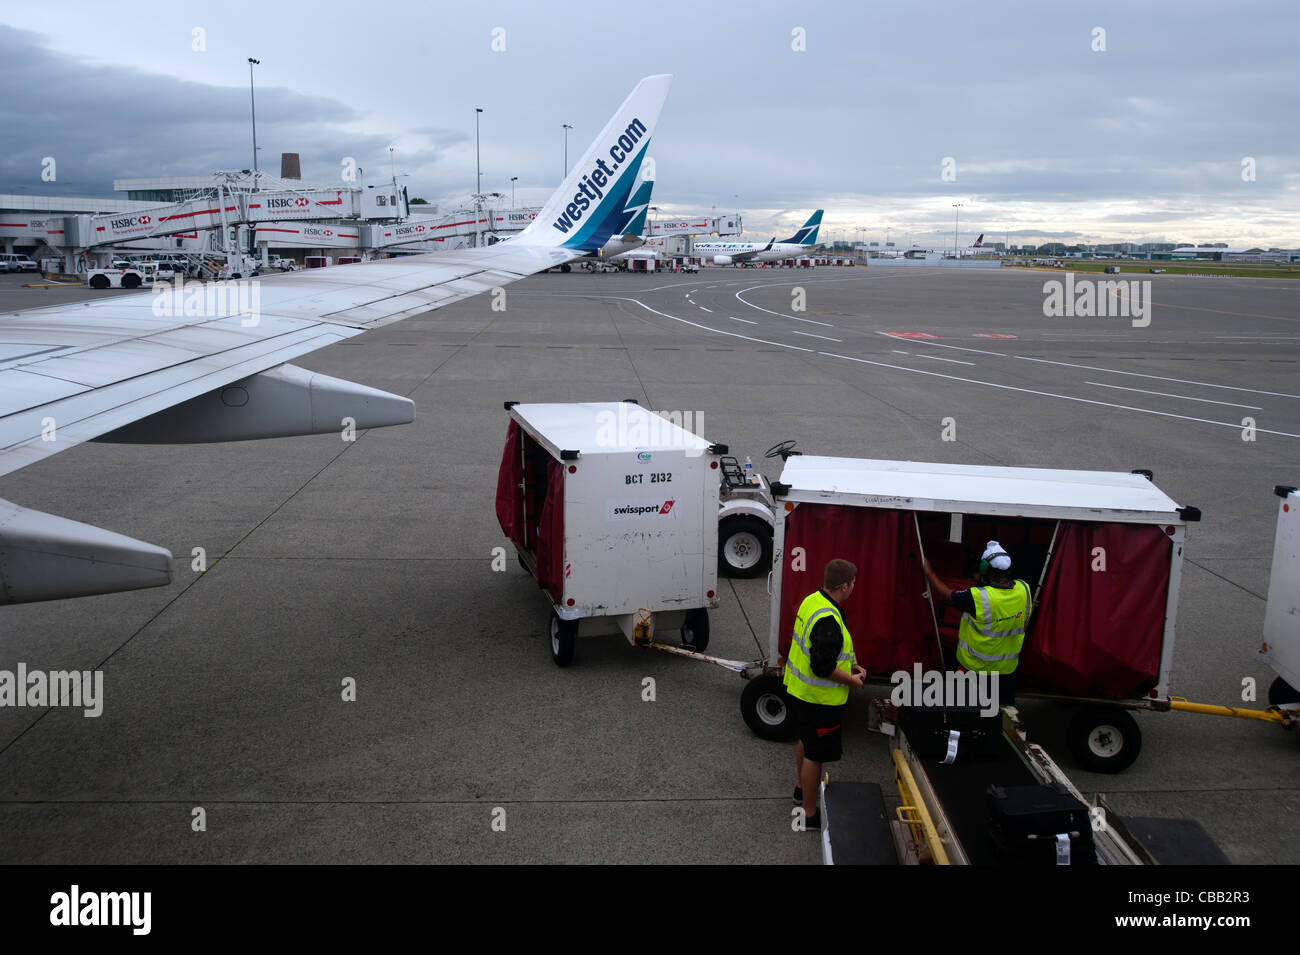 Baggage handlers outside on the tarmac unloading an airplane at an airport Stock Photo